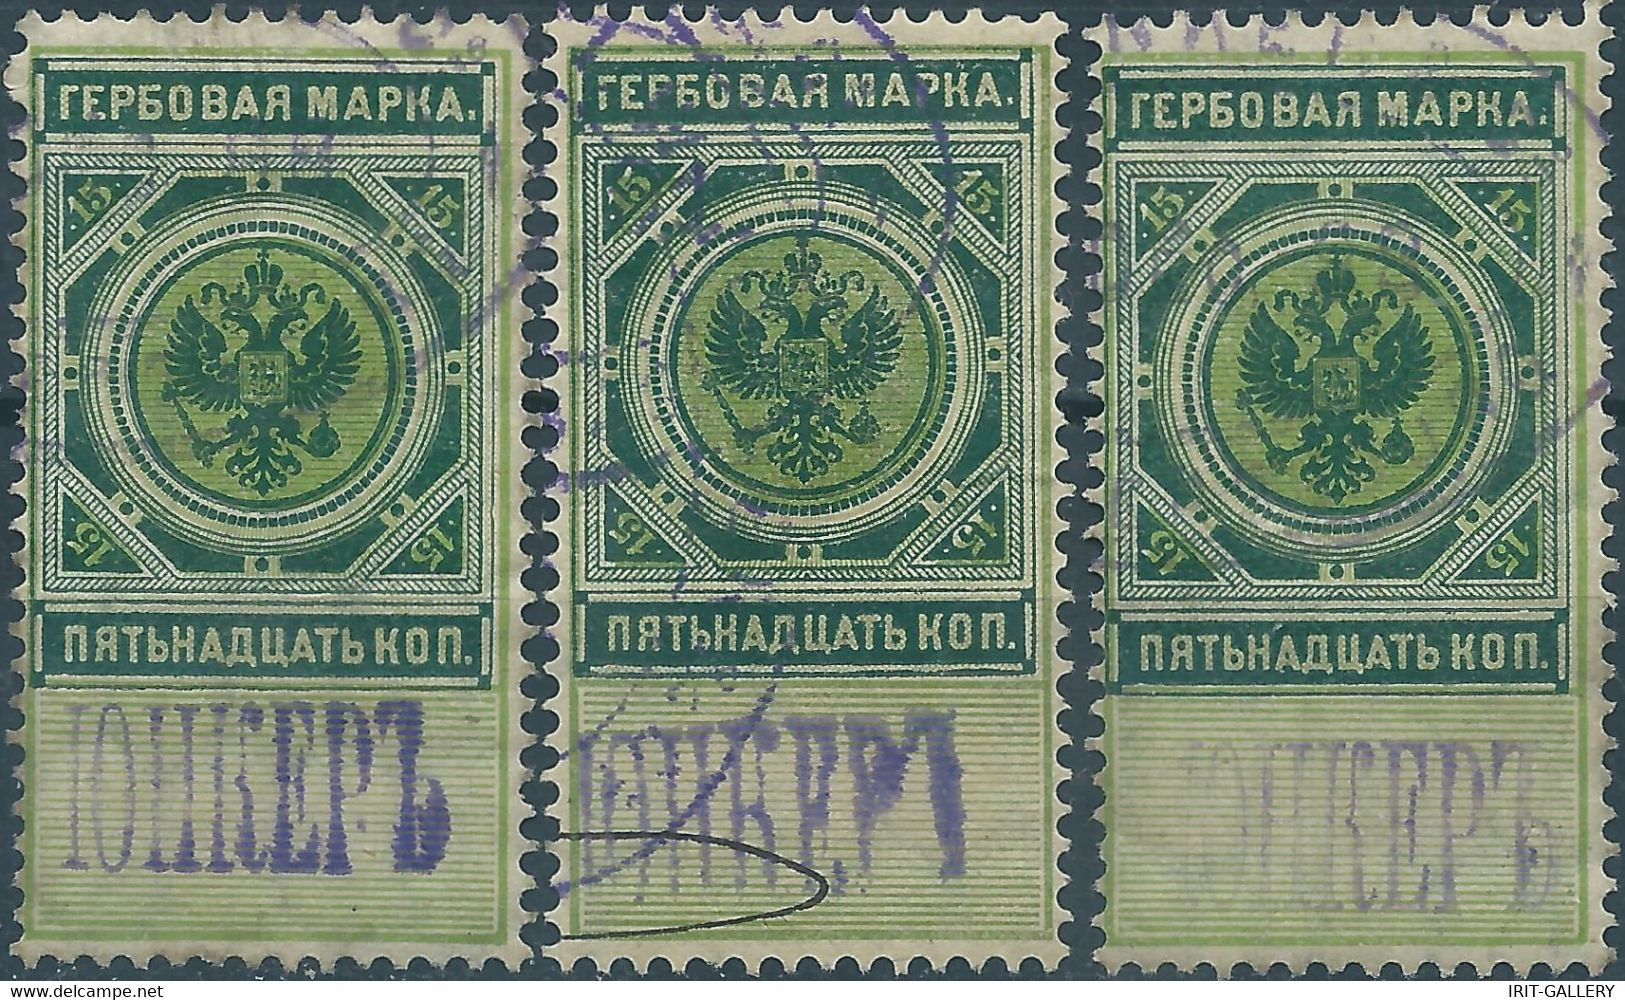 Russia - Russie - Russland,1886-1890 Revenue Stamps Fiscal Tax 15kop,obliterated - Fiscali